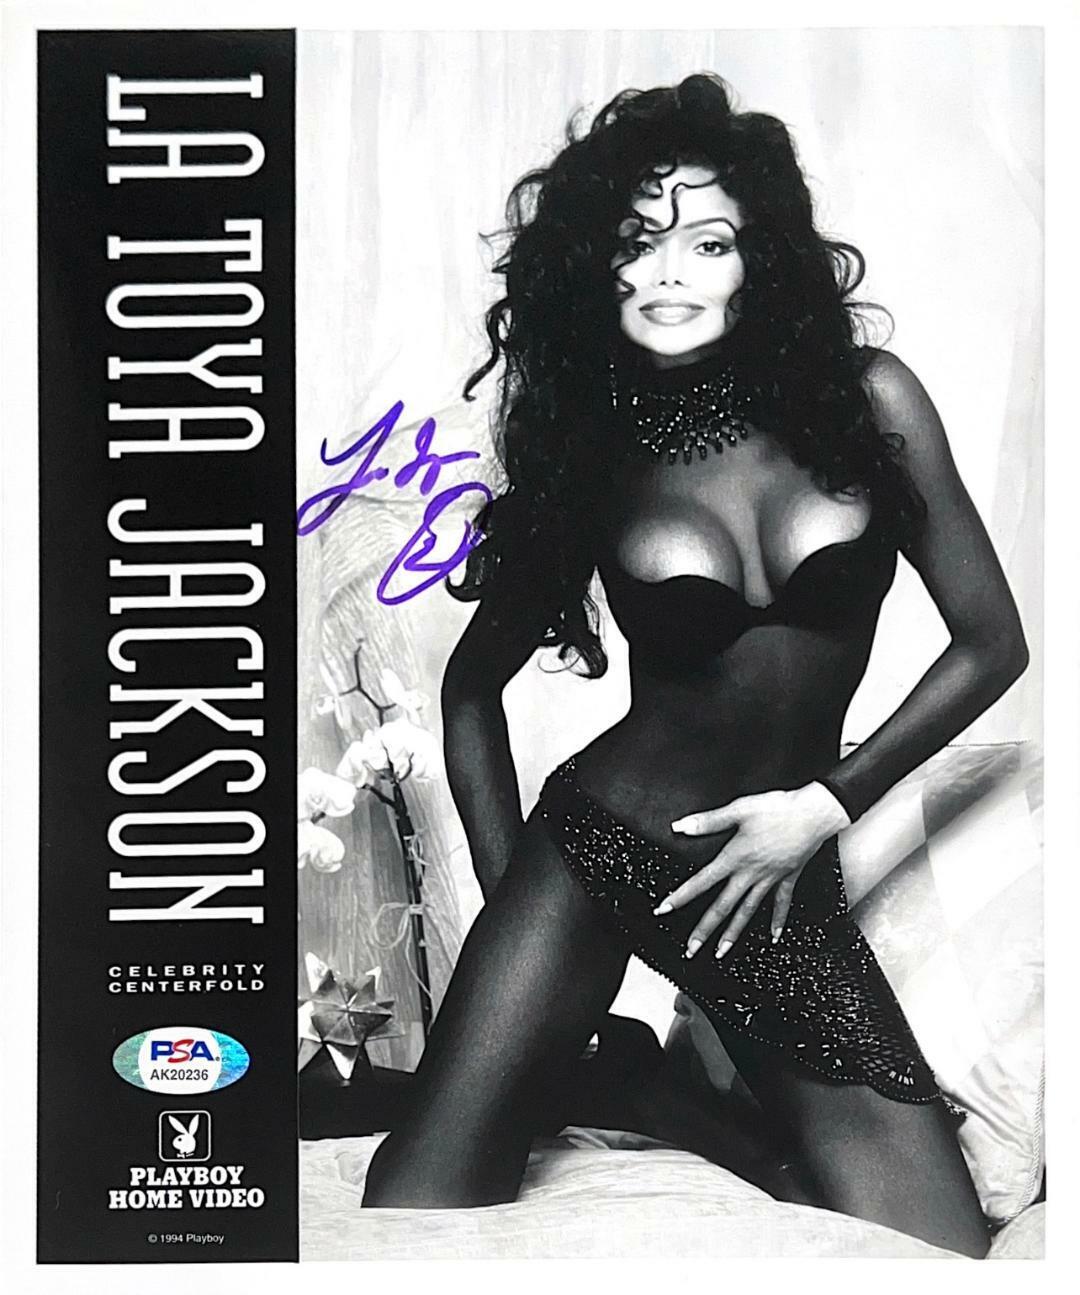 LA TOYA JACKSON HAND SIGNED AUTOGRAPHED 8X10 Photo Poster painting WITH PSA DNA COA VERY RARE